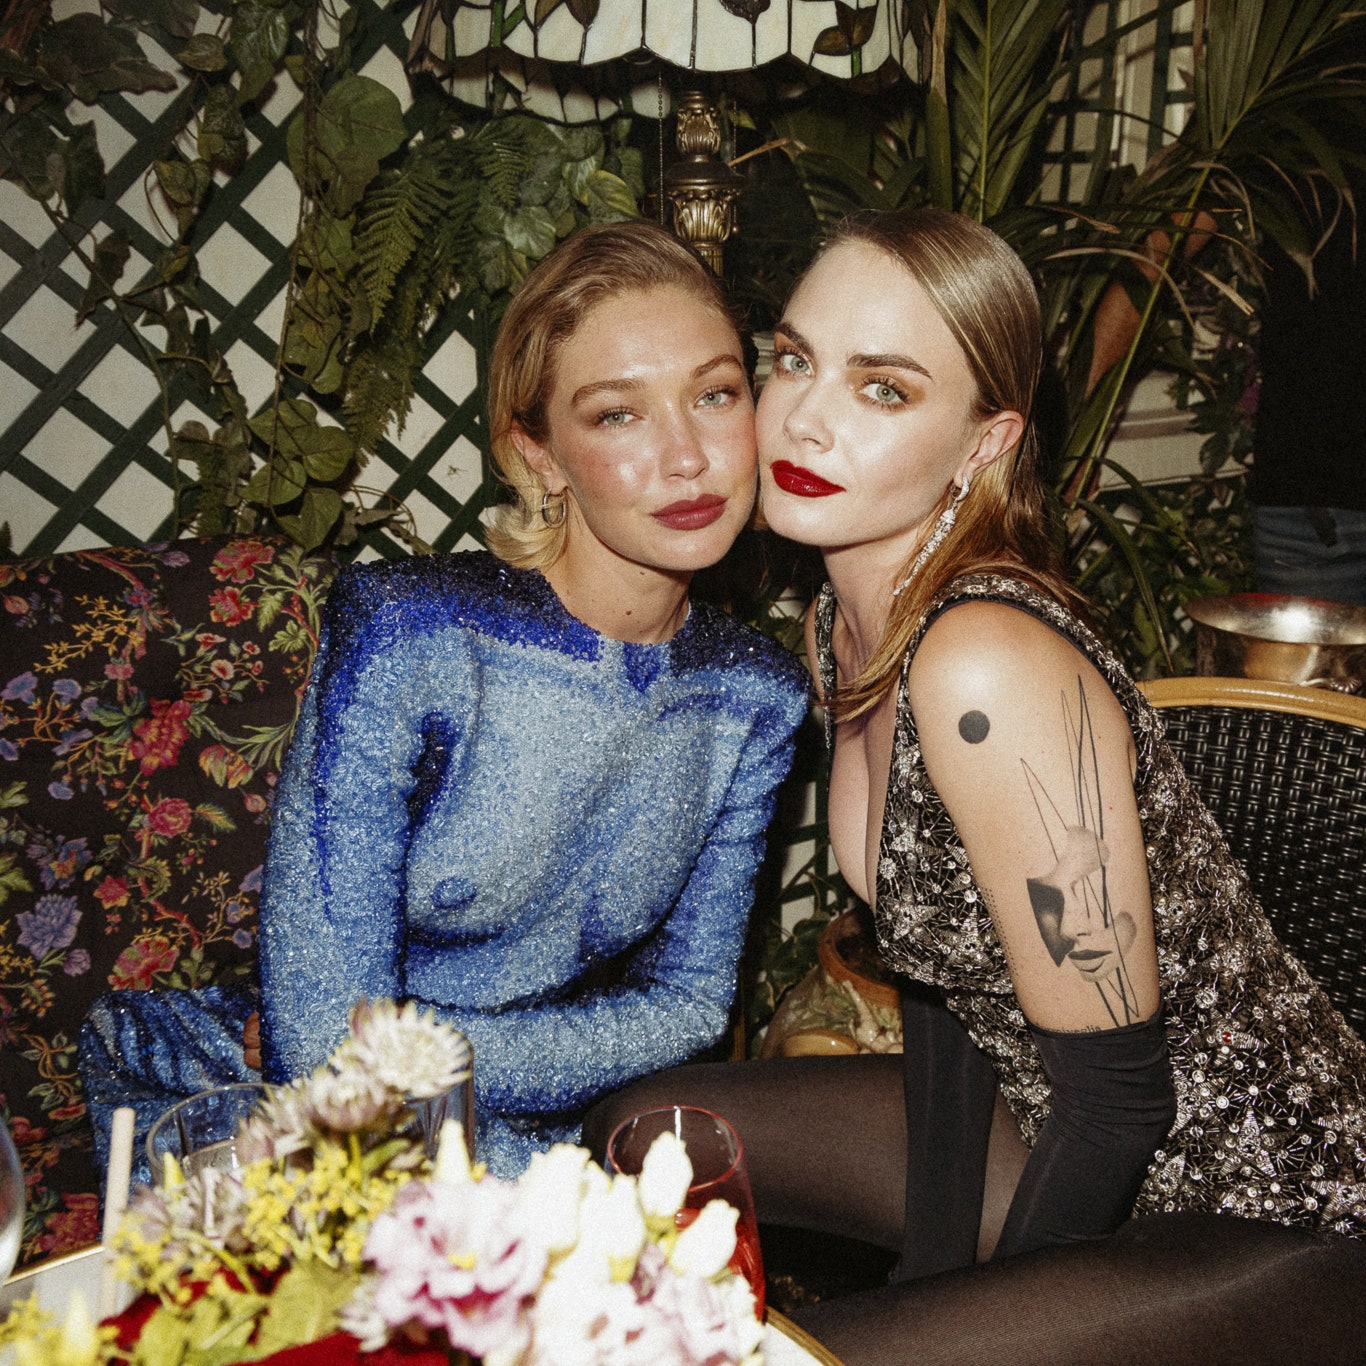 Exclusive! See Inside The Vogue World: Paris After-Party With Naomi Campbell! Gigi Hadid! Sabrina Carpenter!